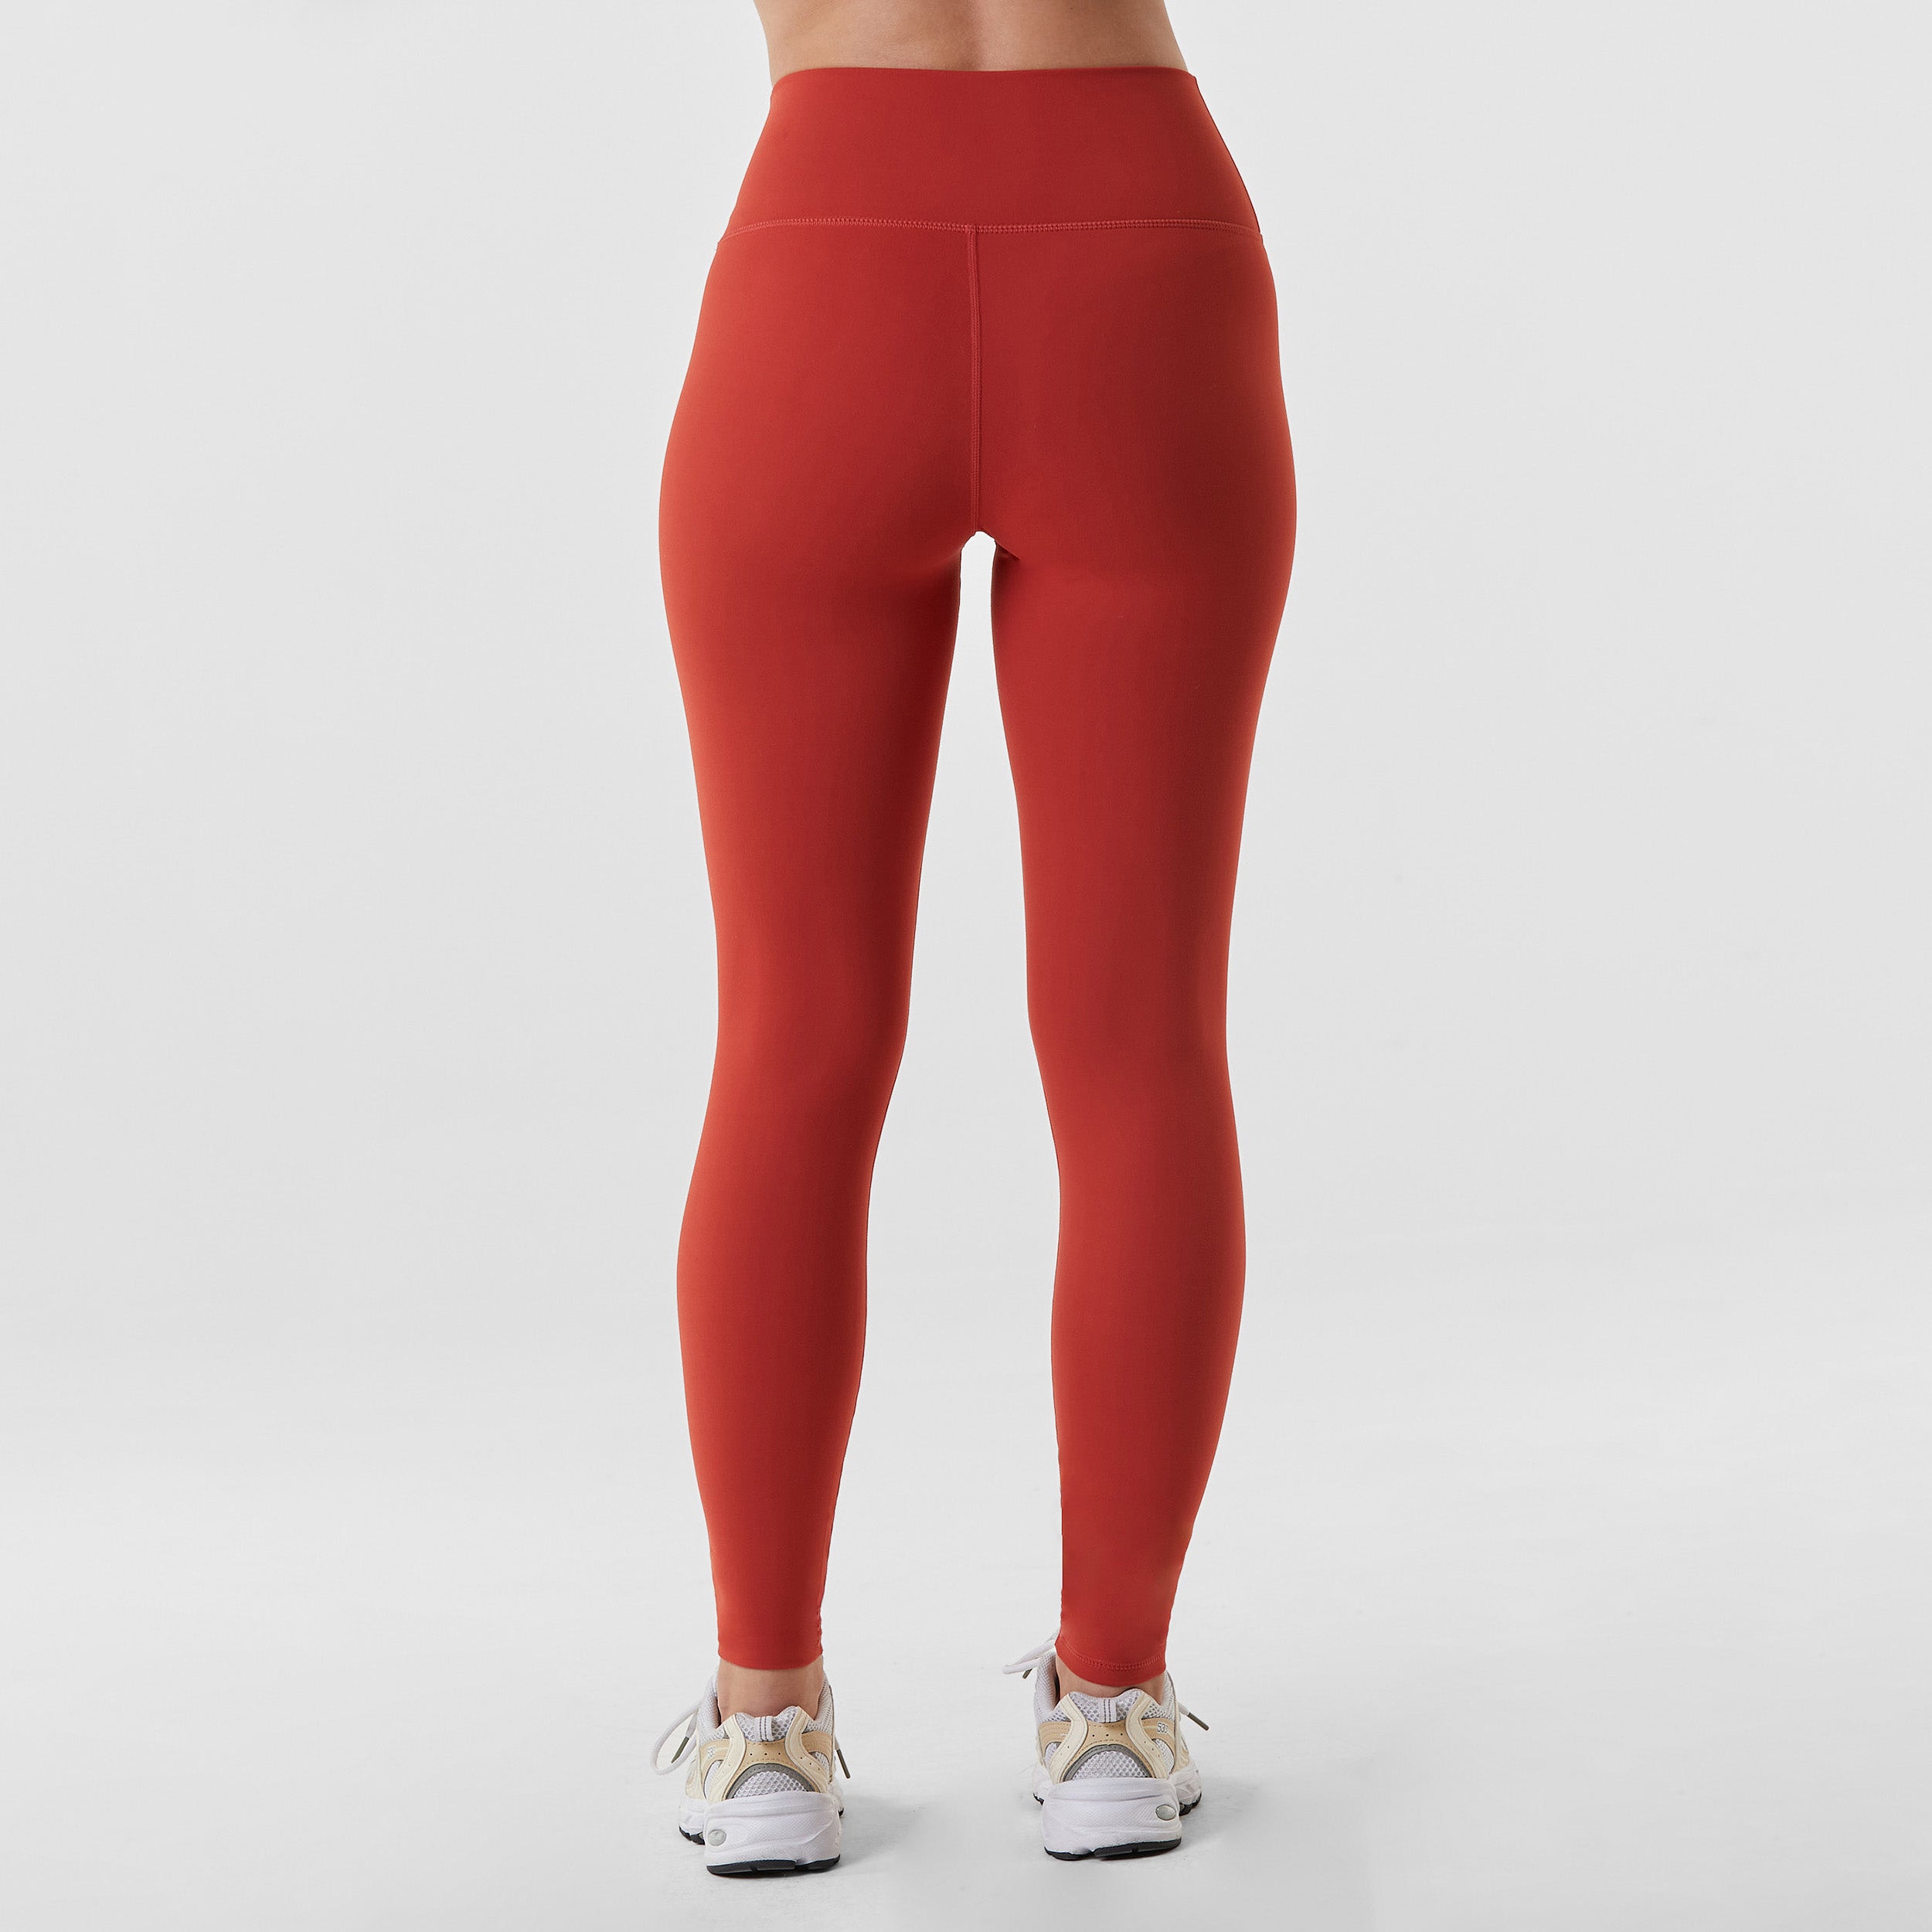 Rear view of woman wearing sculpting and flattering brick red legging